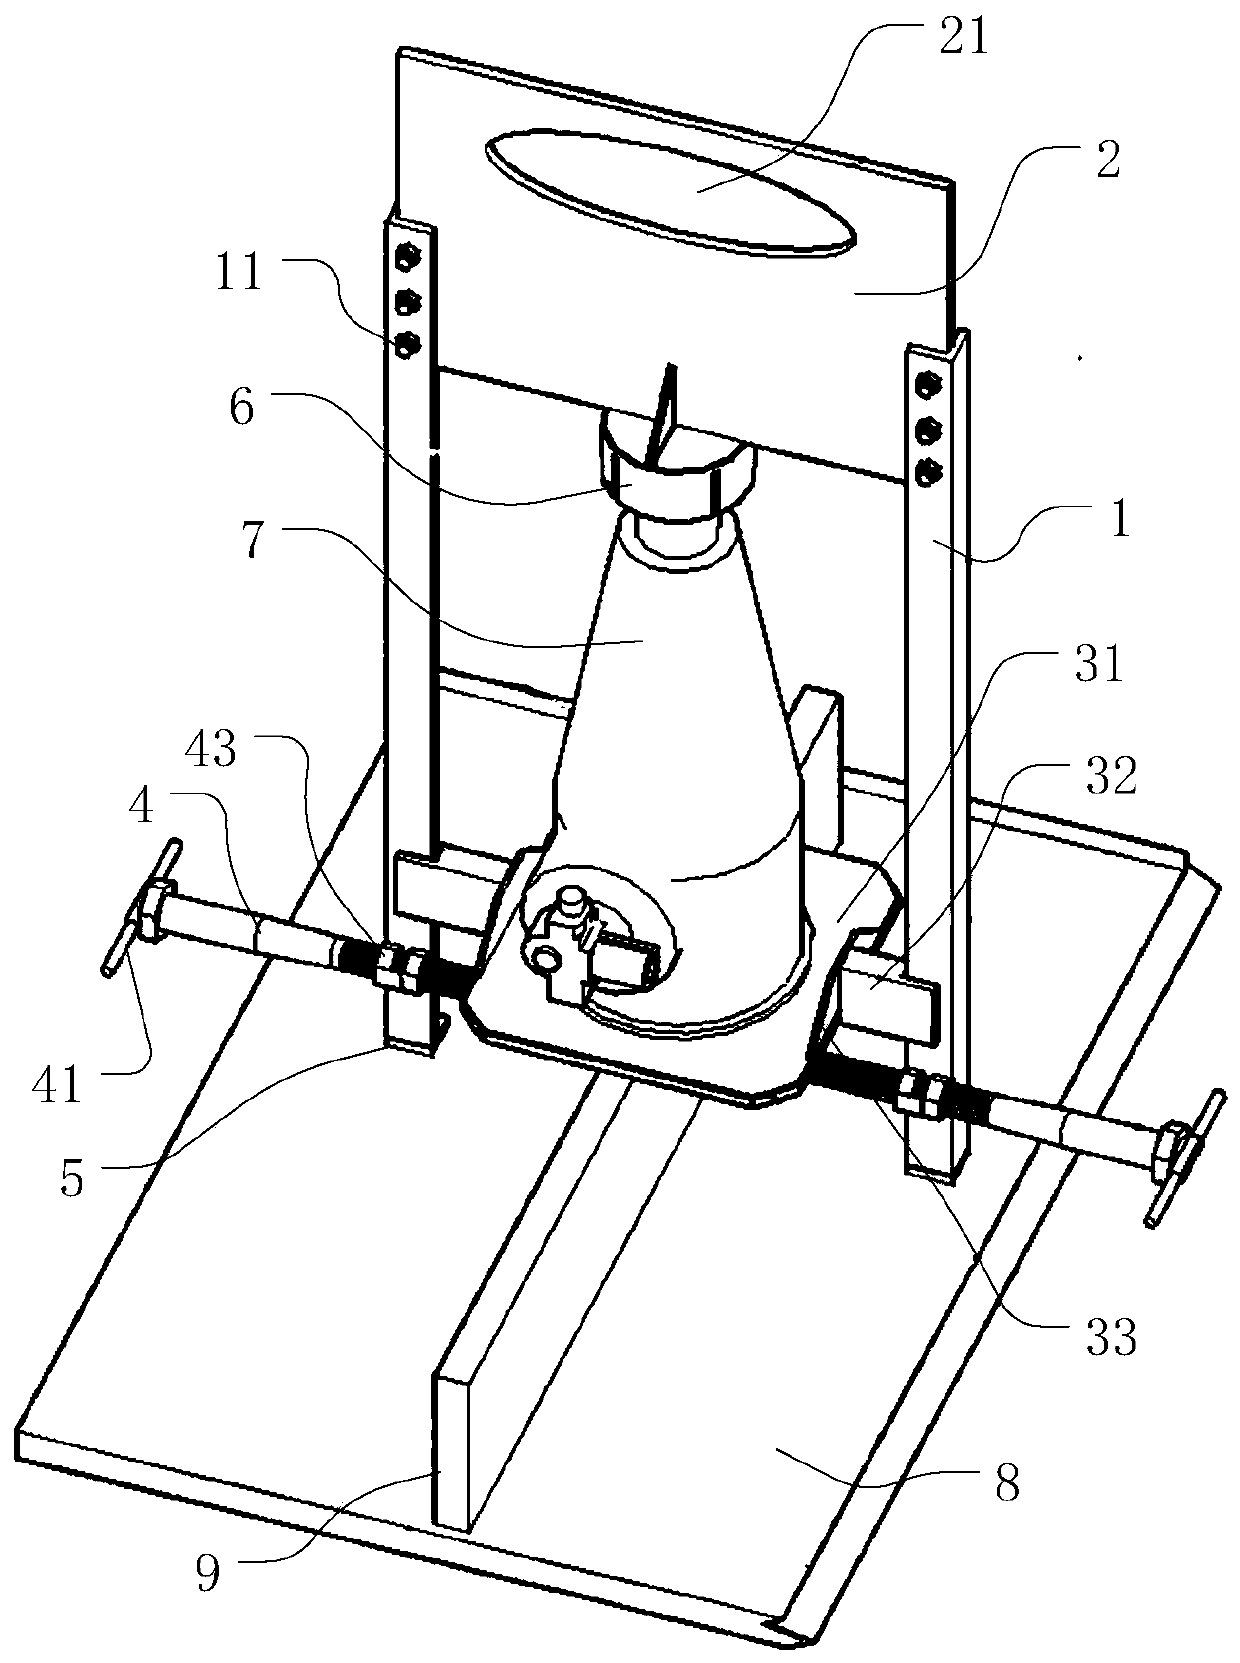 Tightening device used for joint between steel plates during steel structure welding